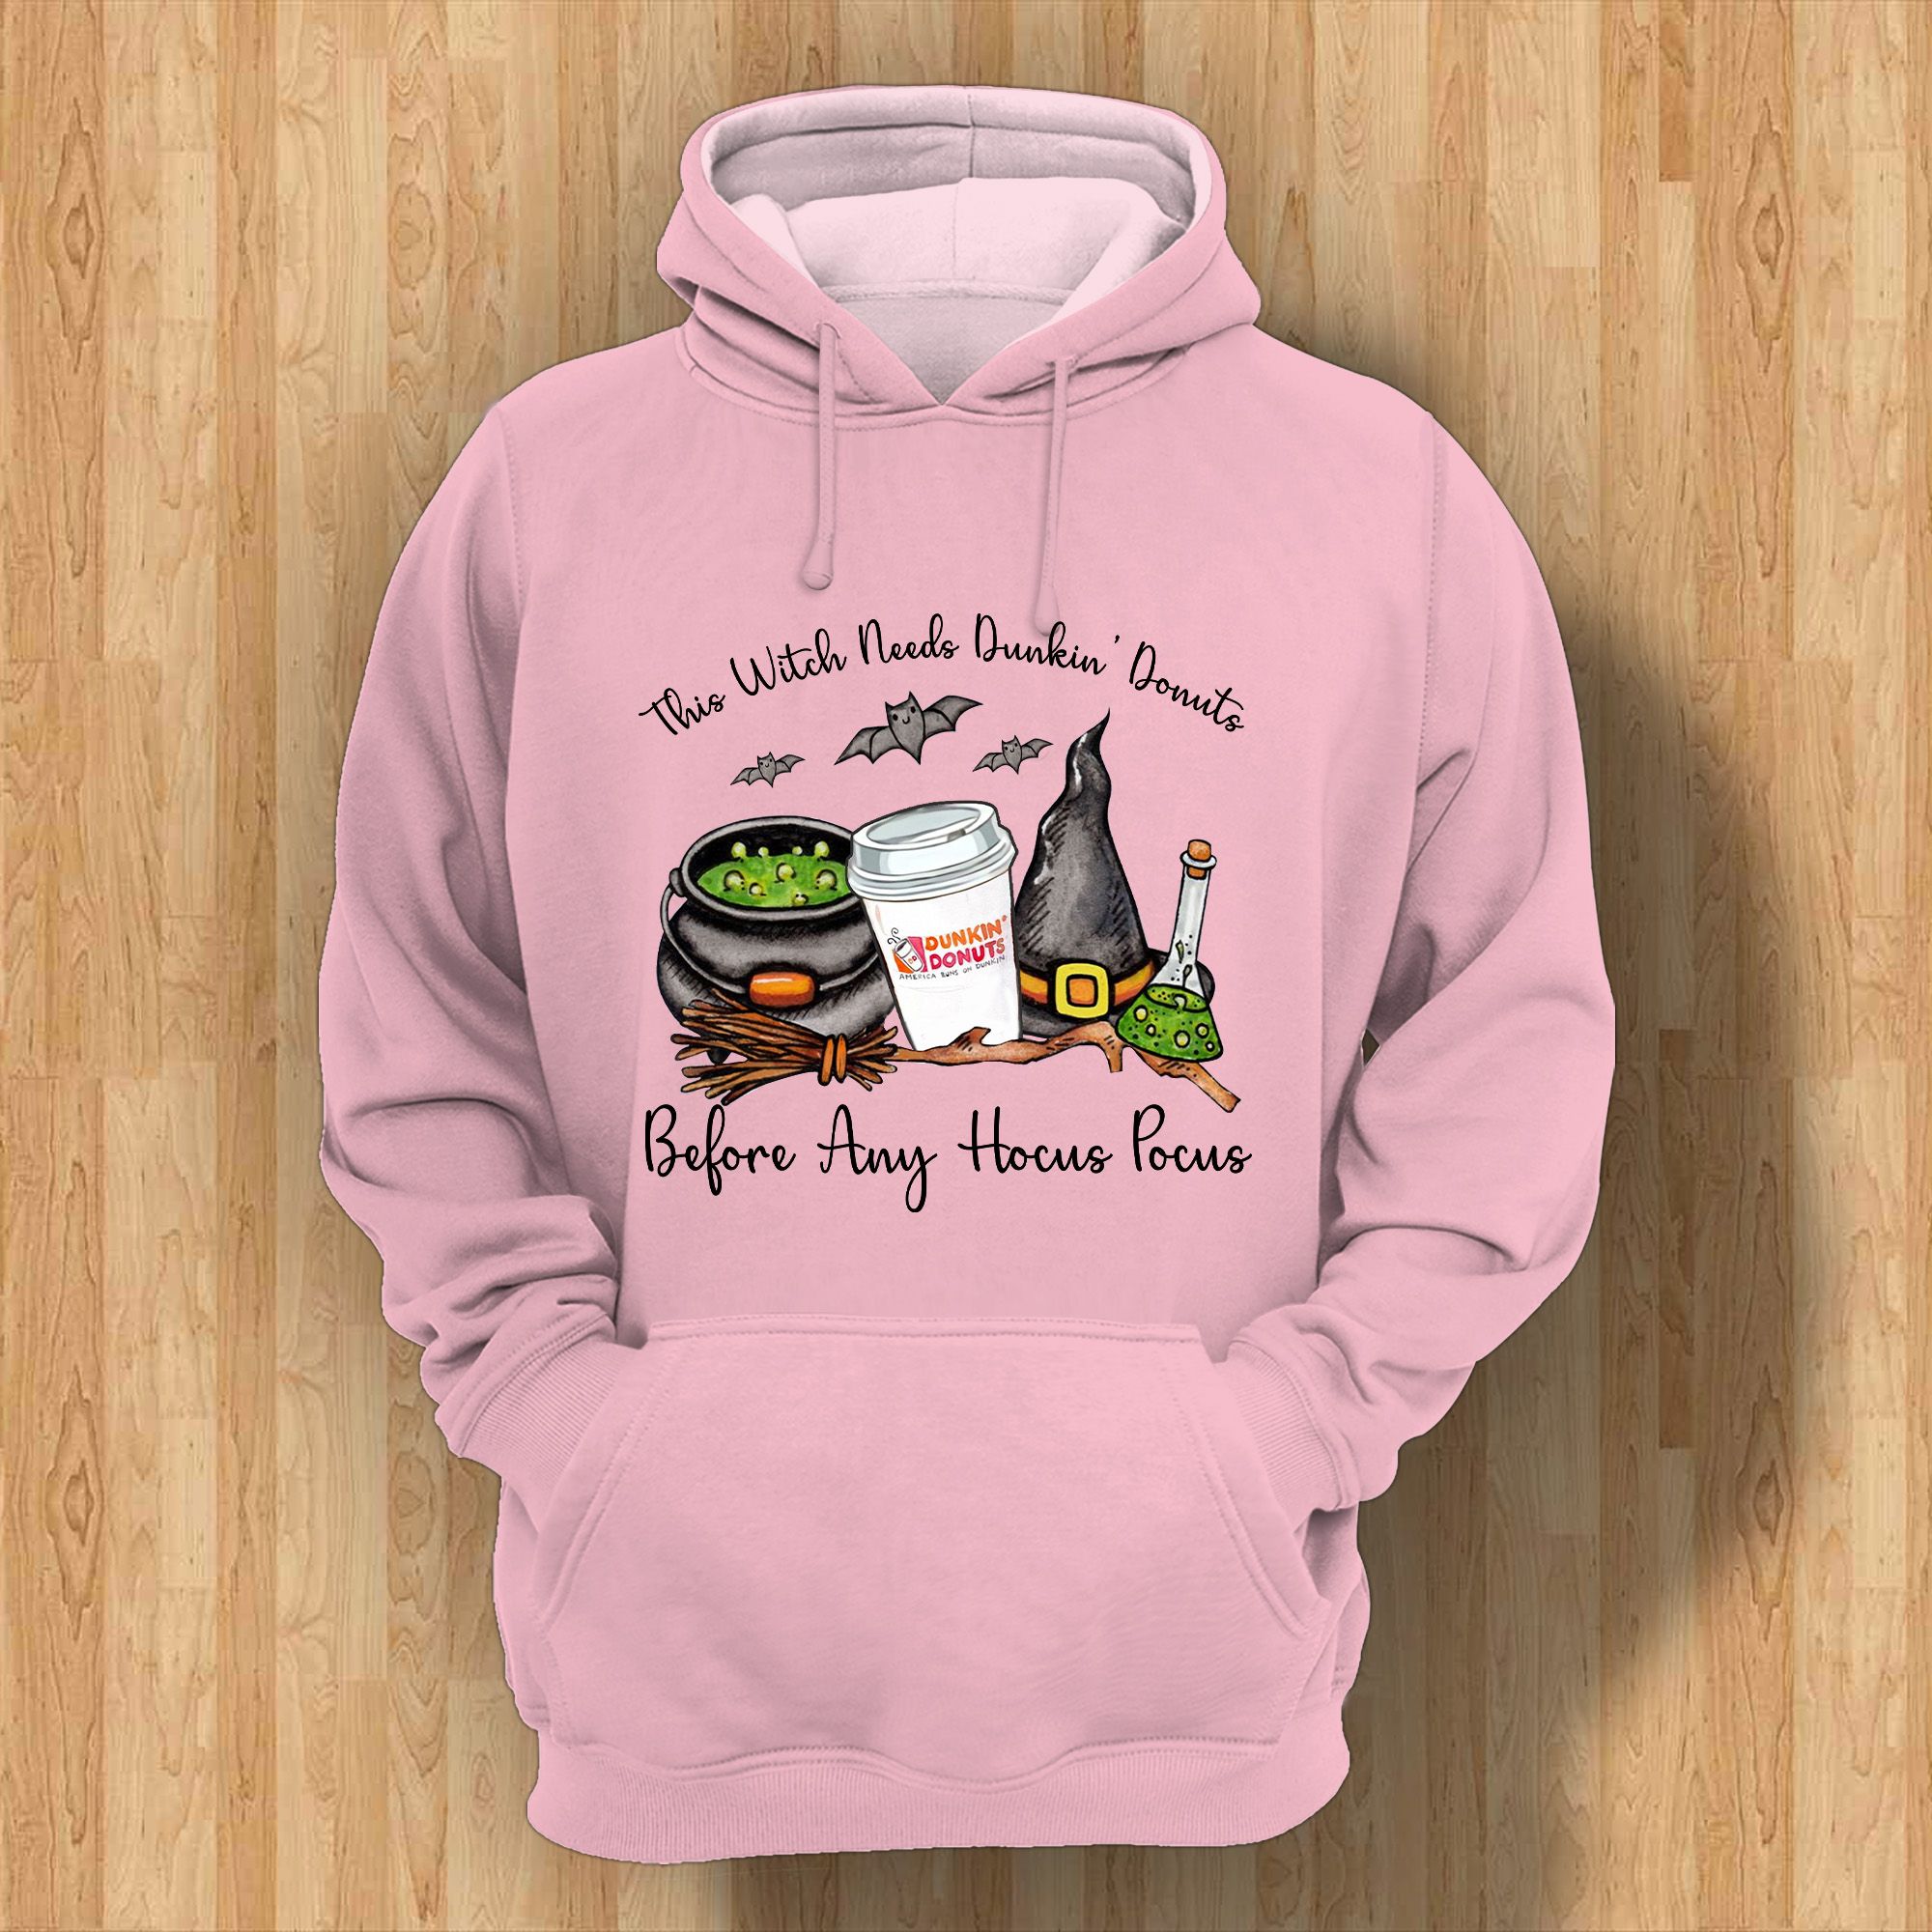 Middily- Dunkin’ Donuts - This Witch Needs Before Any Hocus Pocus -3D Hoodie